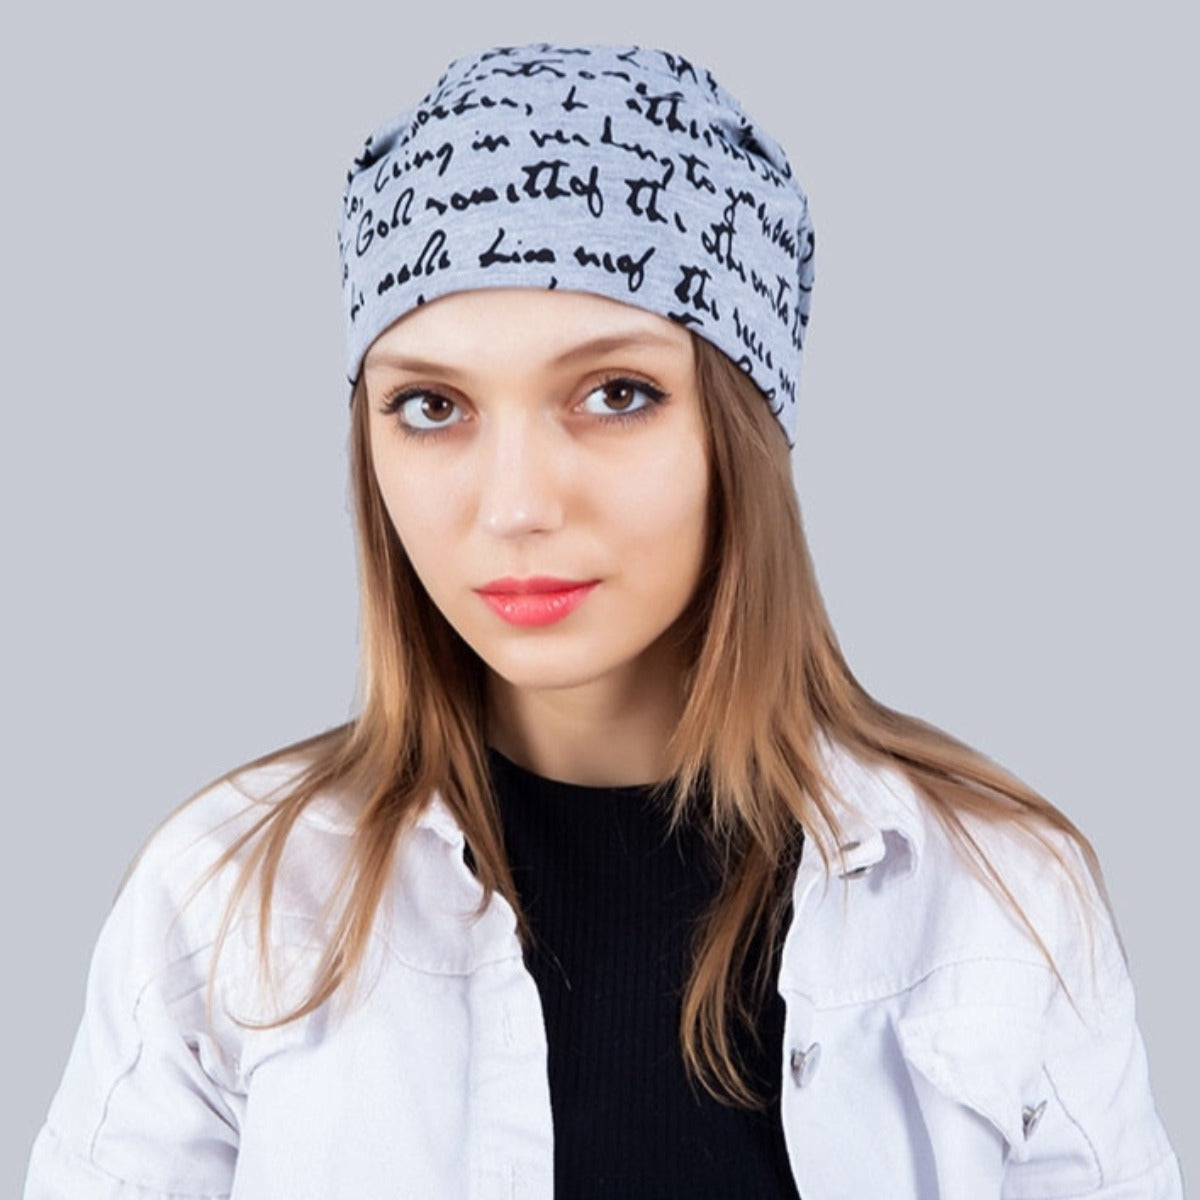 A fashionable woman wearing a Fashionable Printed Beanie Hat.